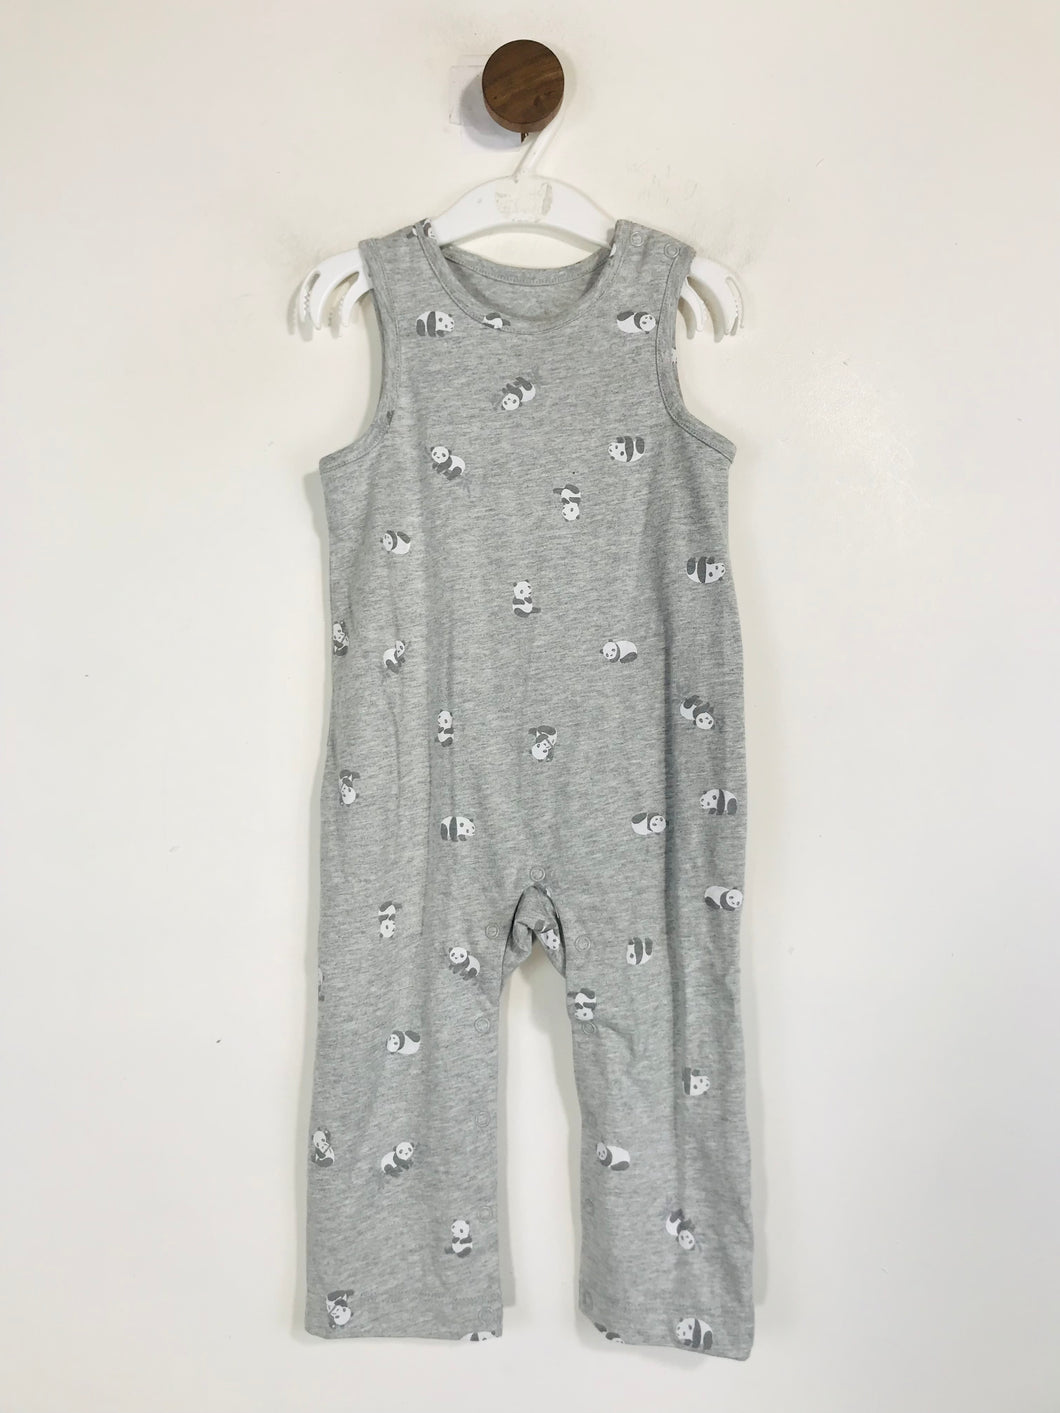 The Little White Company Kid's Cotton Animal Print Playsuit | 12-18 Months | Grey